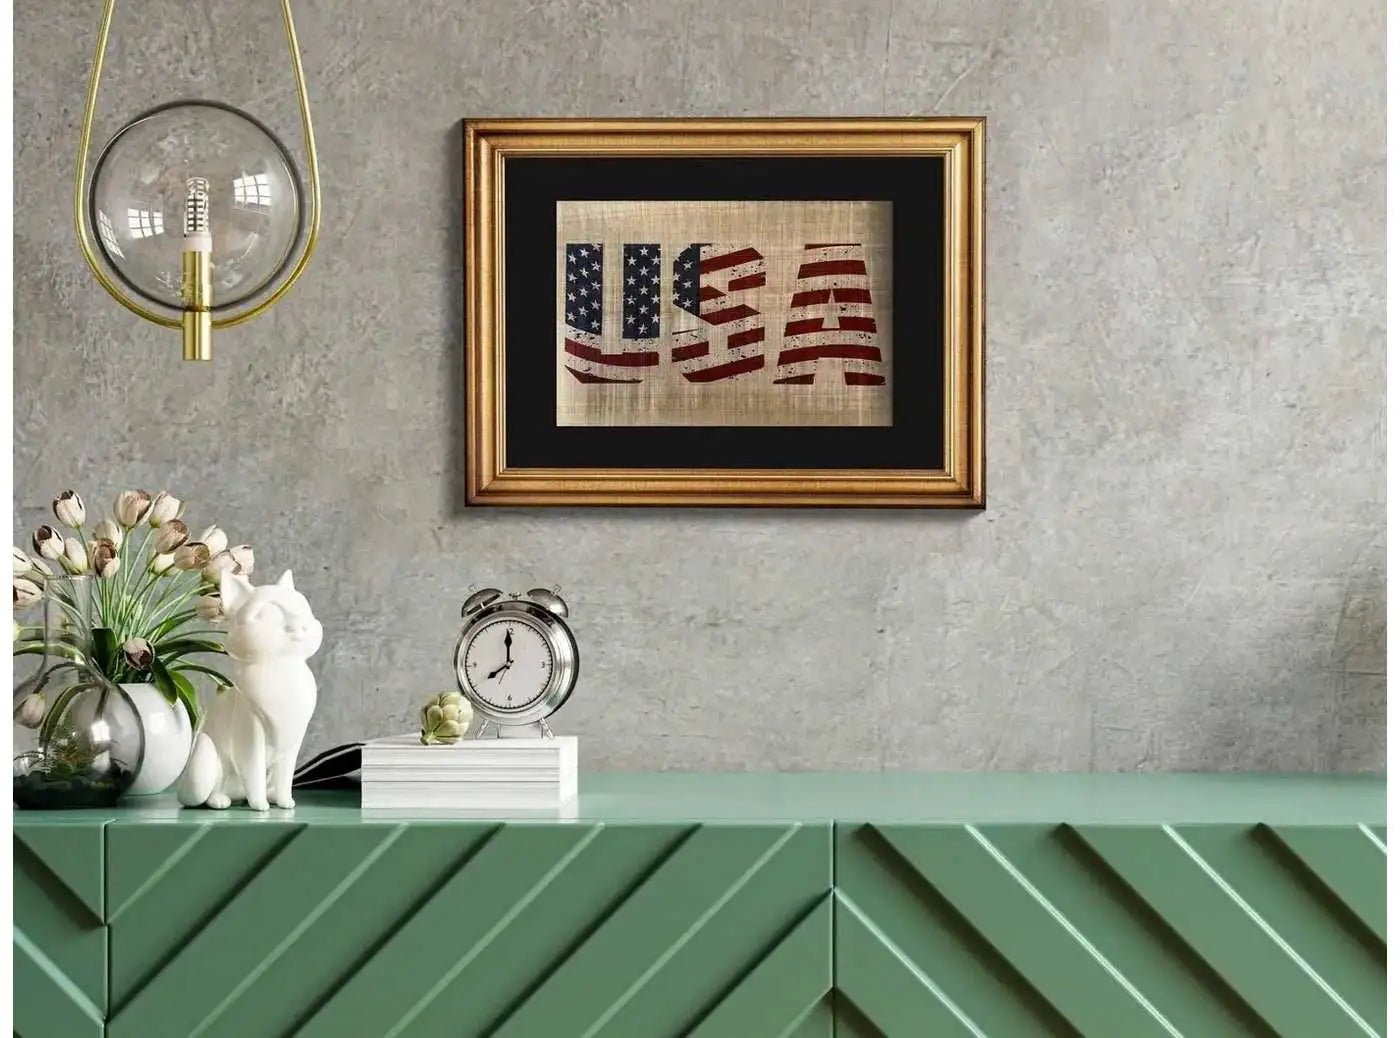 Vintage Usa Text Flag Office Decoration Printing Wall Decor on Papyrus - American Flag - Gift for Usa Lovers - School Home Wall Art